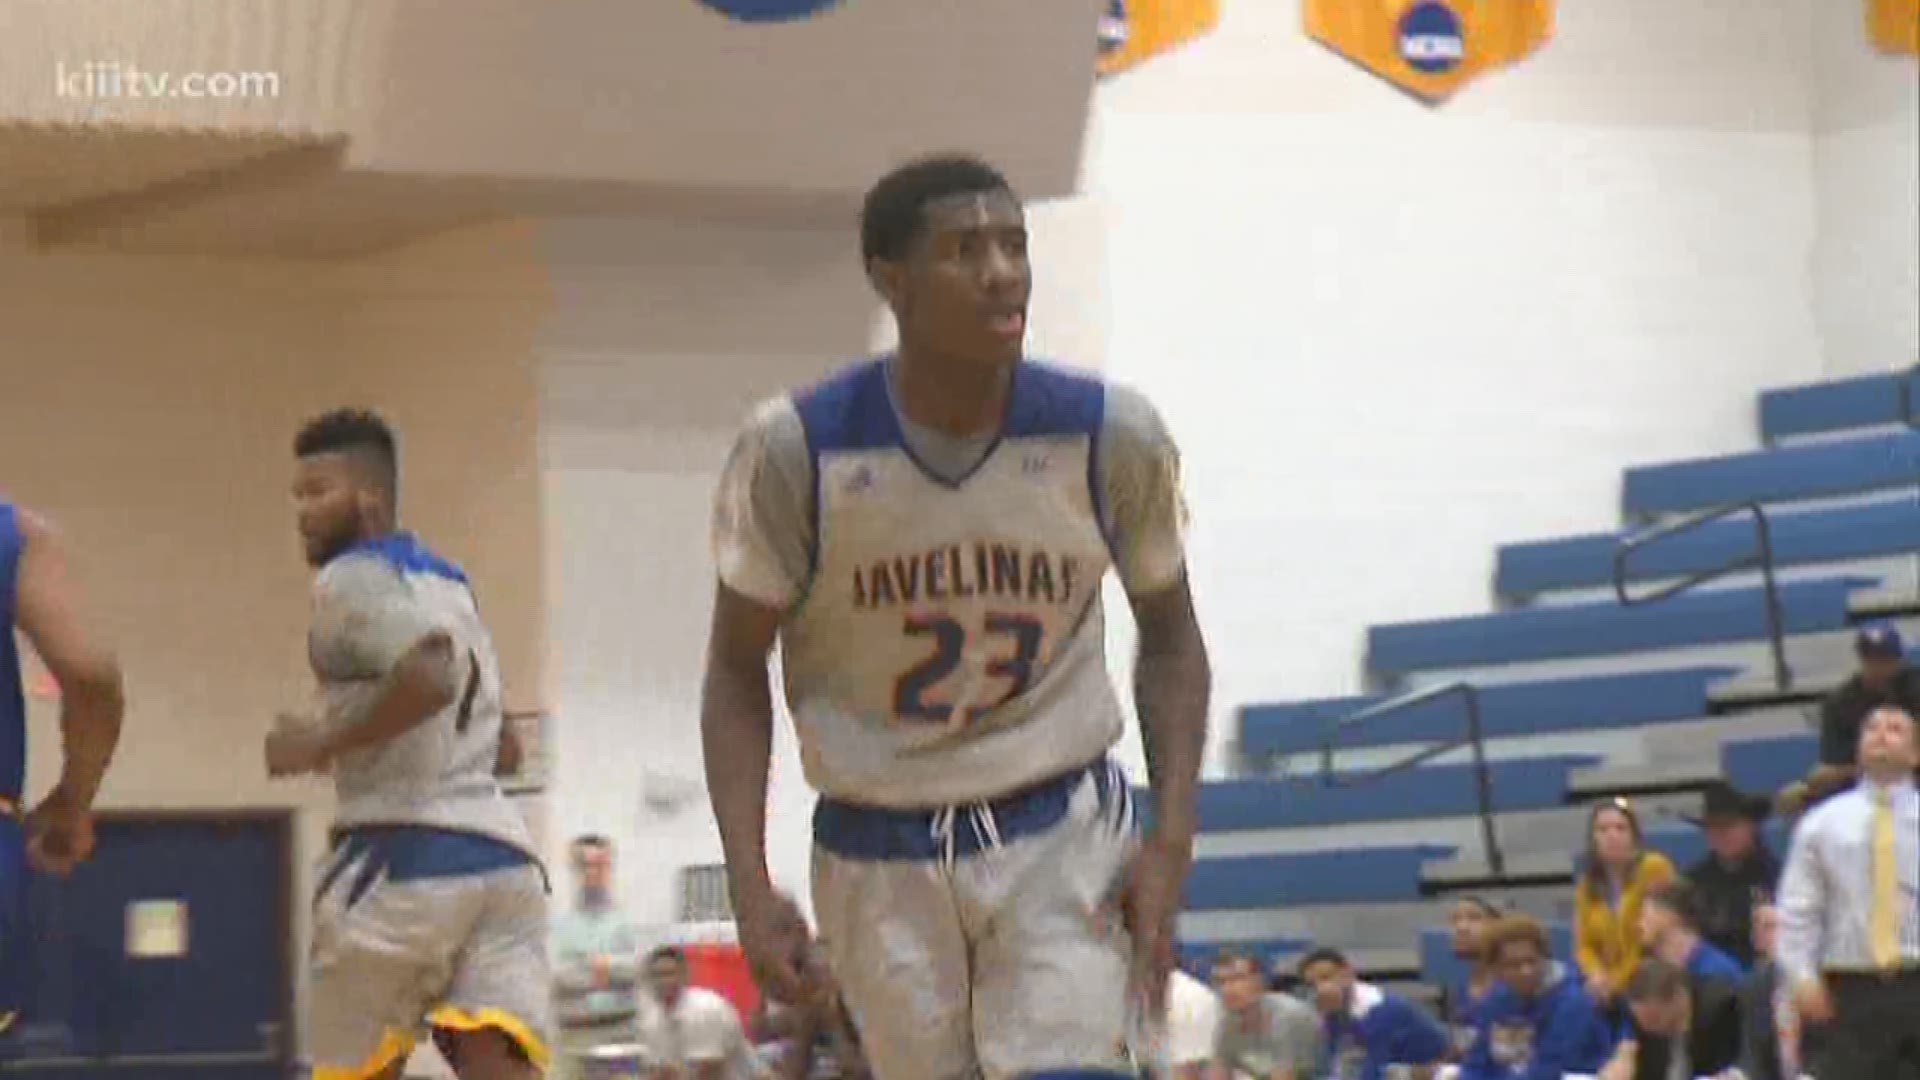 Texas A&M-Kingsville men's basketball dropped to 4-7 on the season with a 75-65 loss to Angelo State.